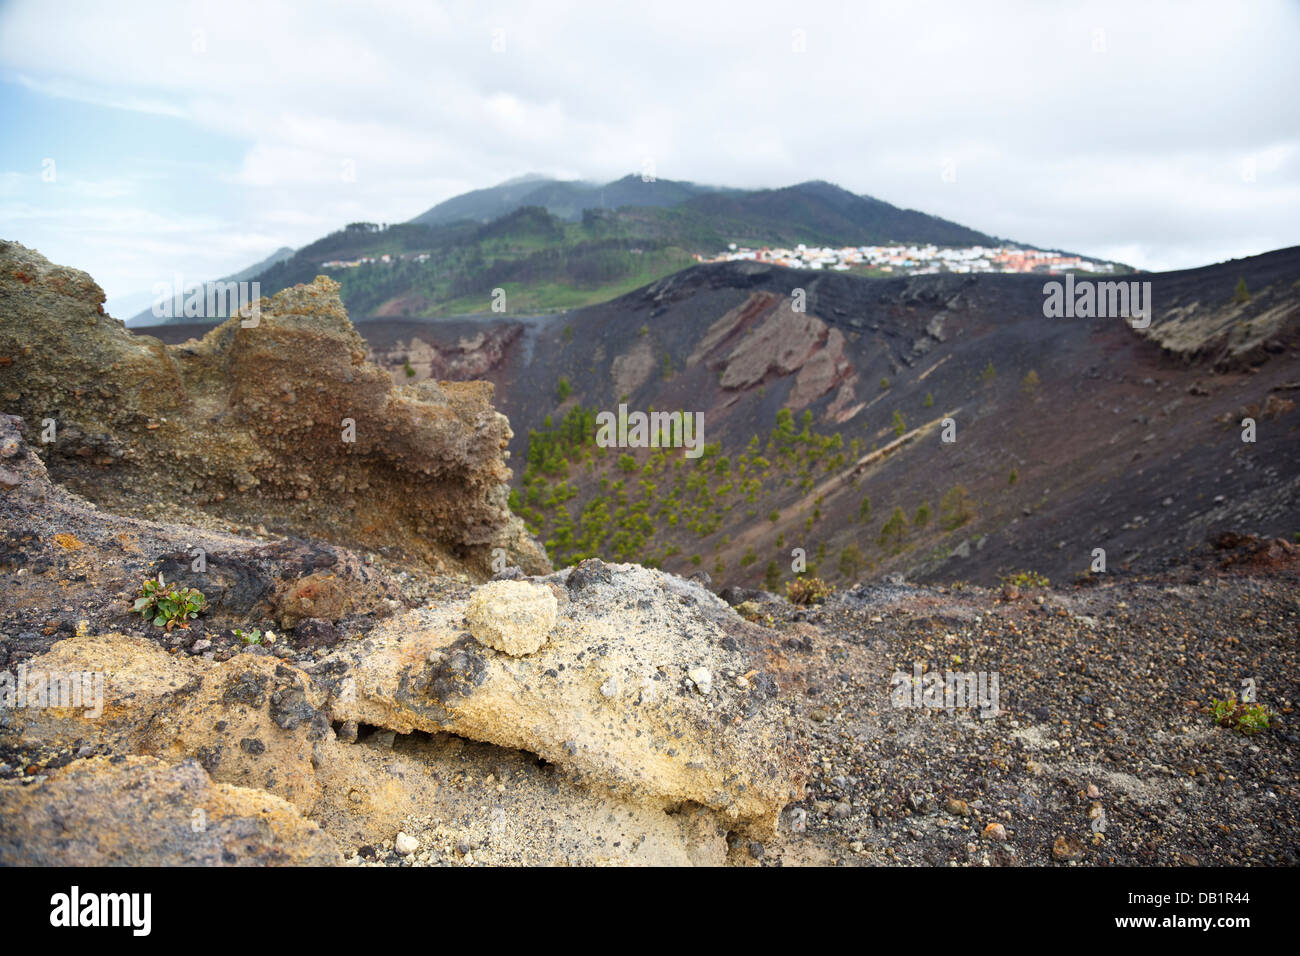 Volcán San Antonio crater with the village Los Canarios in the background. Stock Photo